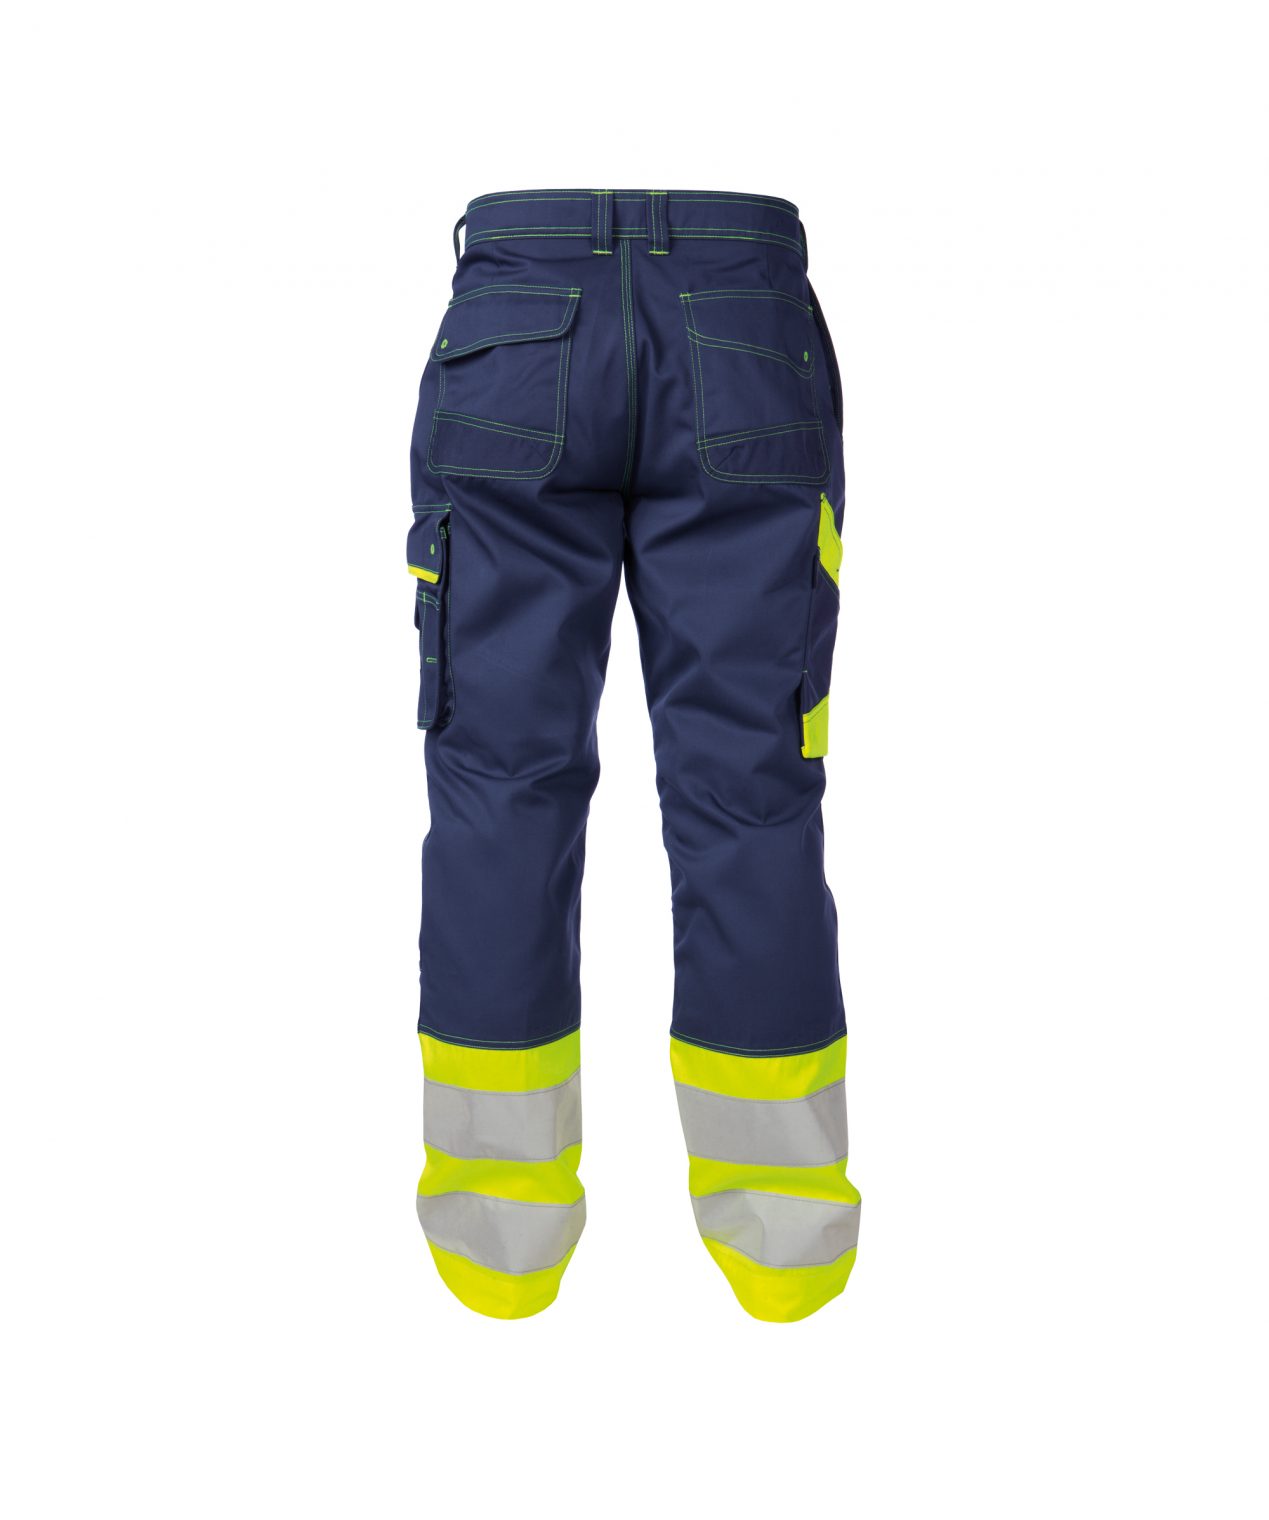 phoenix high visibility work trousers navy fluo yellow back